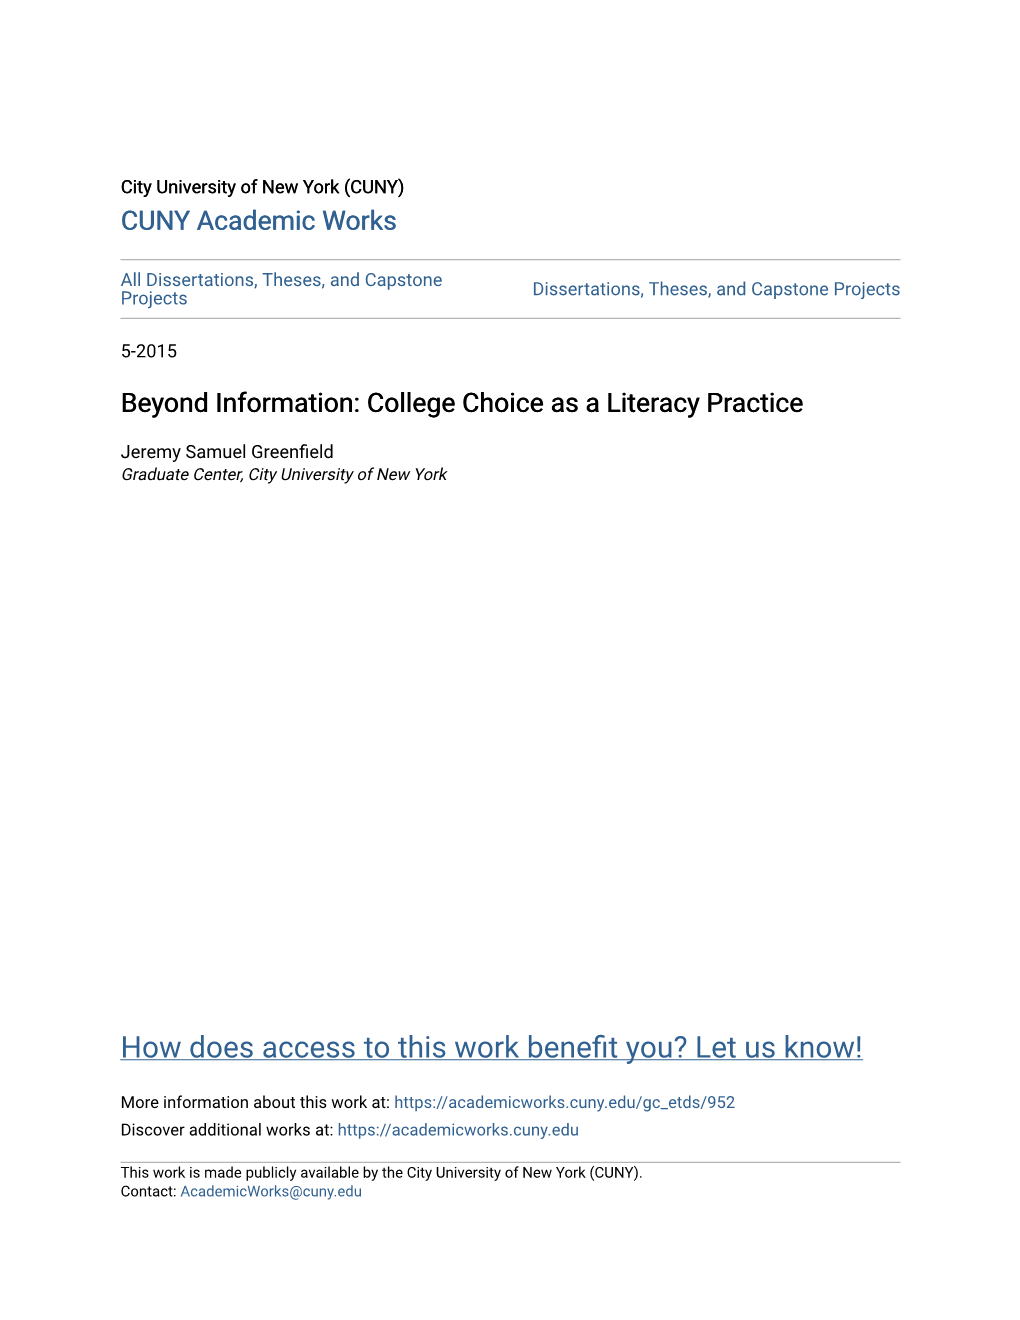 College Choice As a Literacy Practice